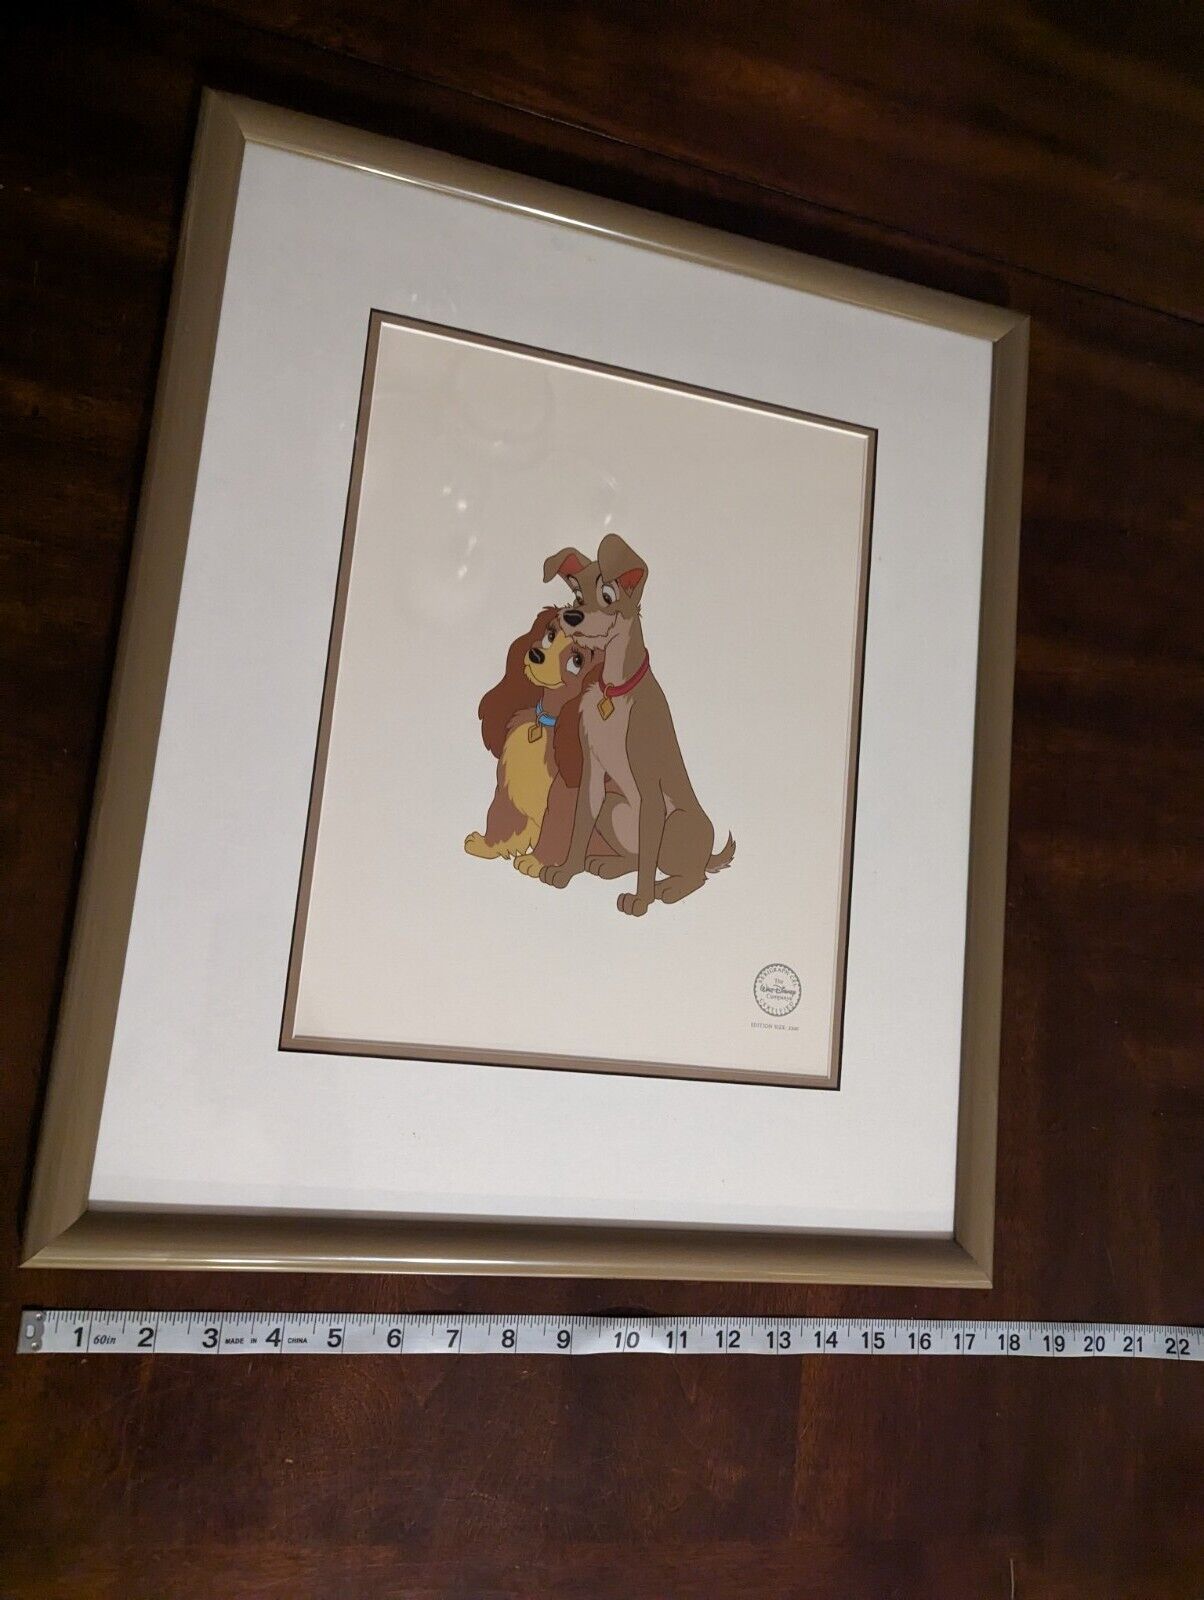 Original 1993 LE 2500 Serigraph LADY AND THE TRAMP Movie Cell Disney animation